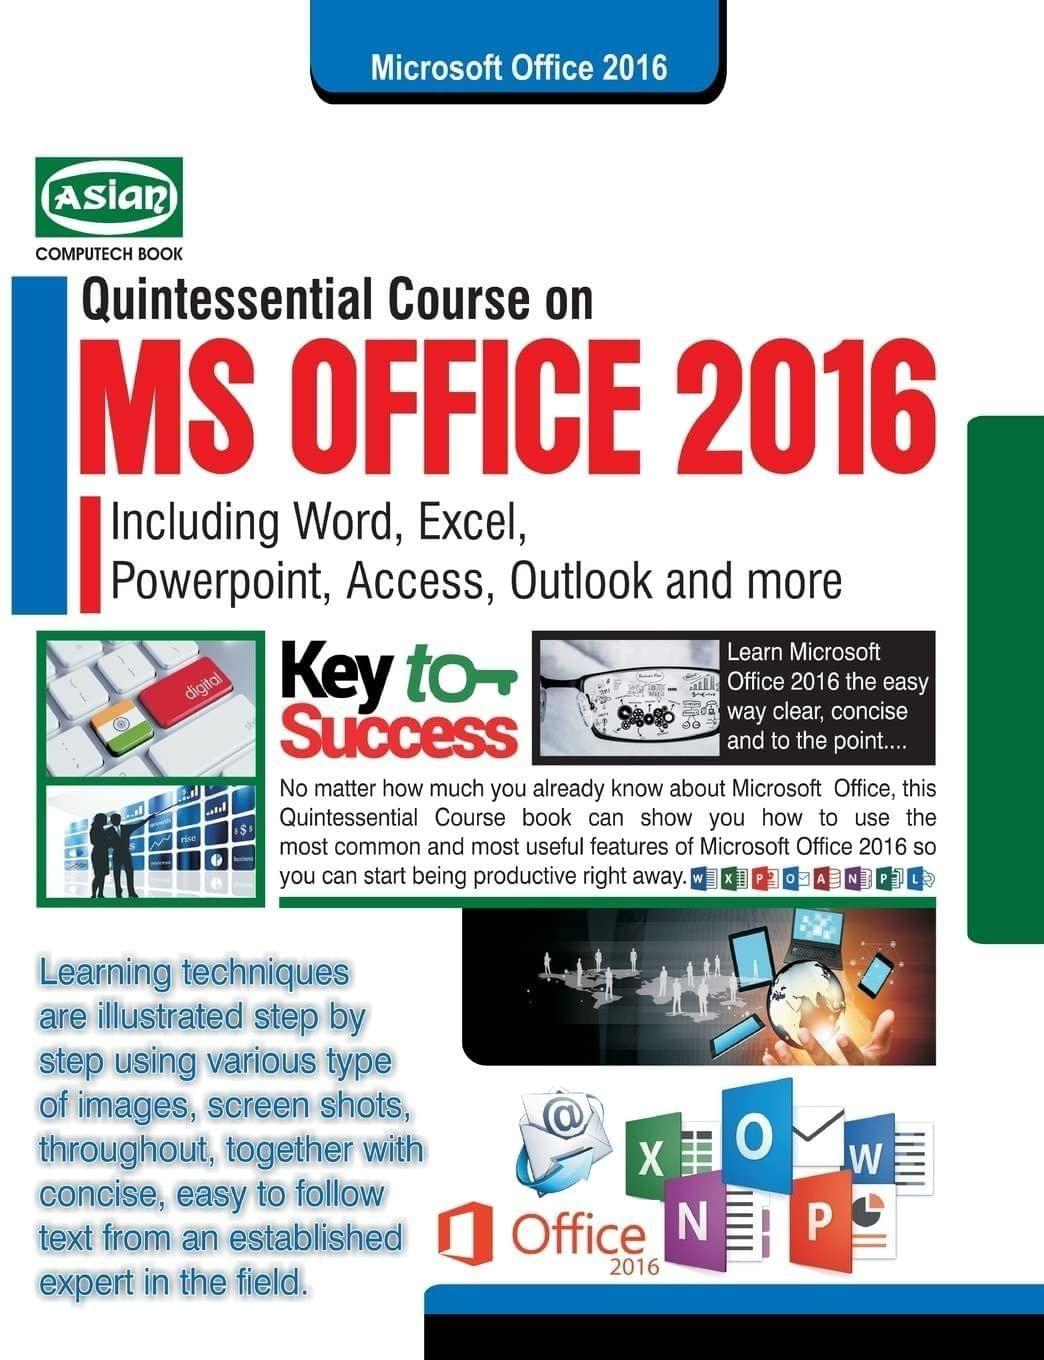 MS OFFICE 2016 QUINTESSENTIAL COURSE (WITHFREE DVD) [Paperback] A Panel of Authors